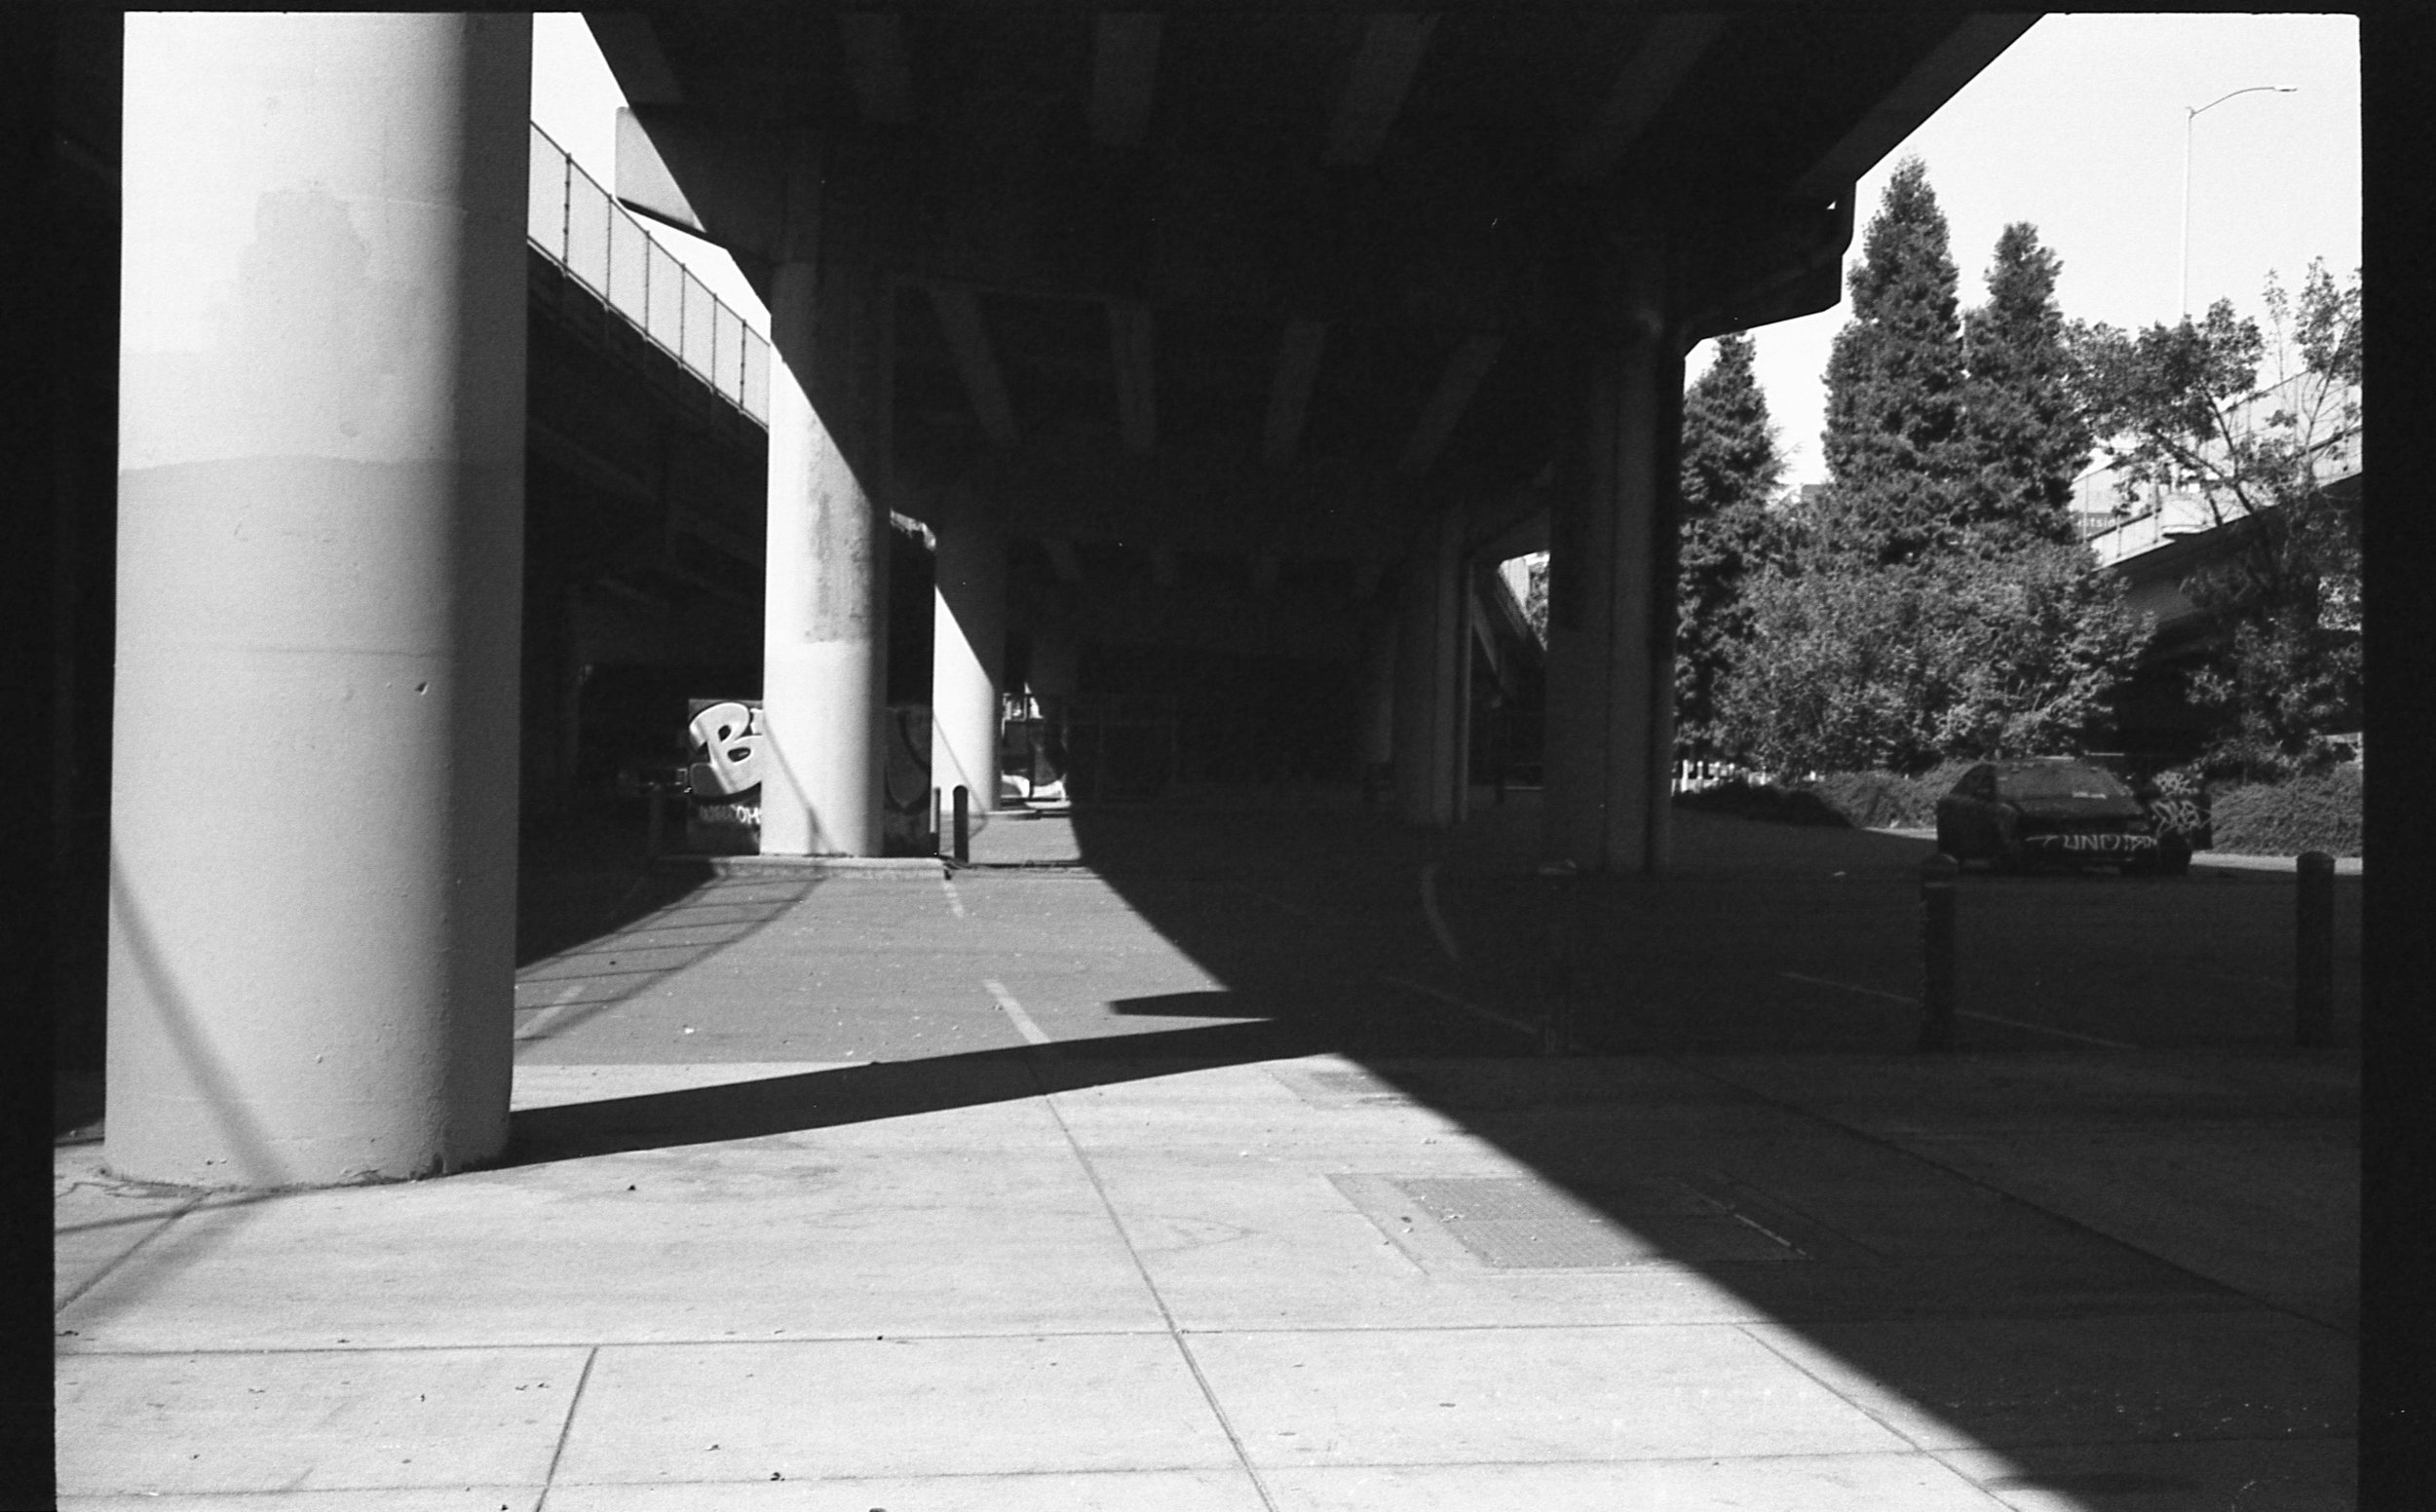 East Riverfront Trail Underpass, Portland OR, August 2021 